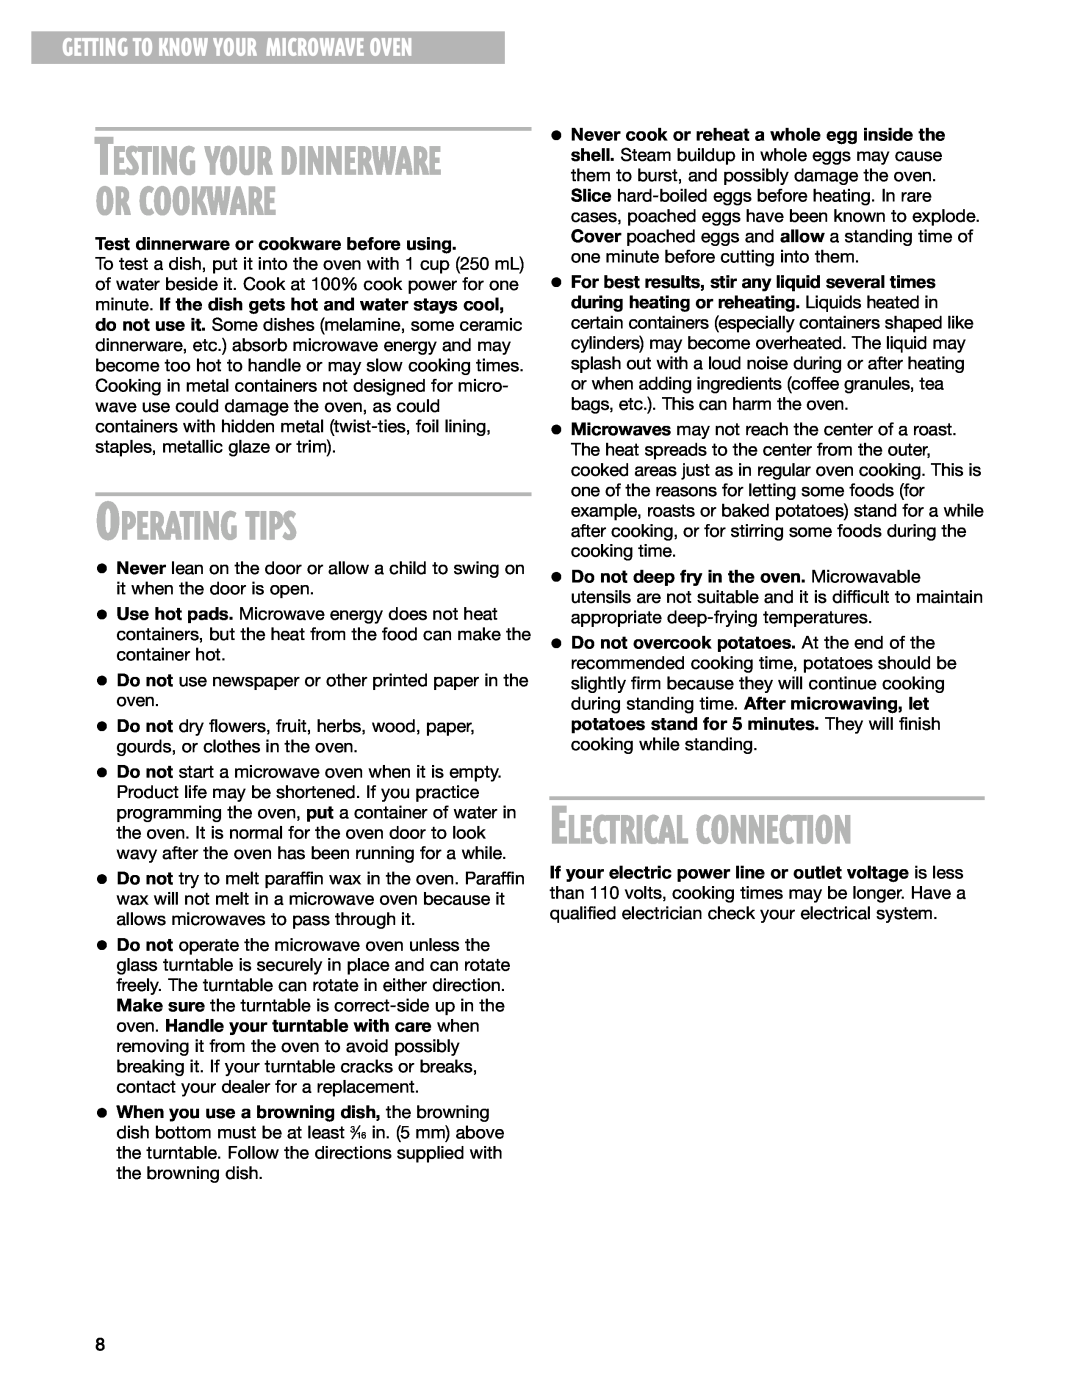 Whirlpool MT4110SK installation instructions Or Cookware, Operating Tips, Electrical Connection, Testing Your Dinnerware 